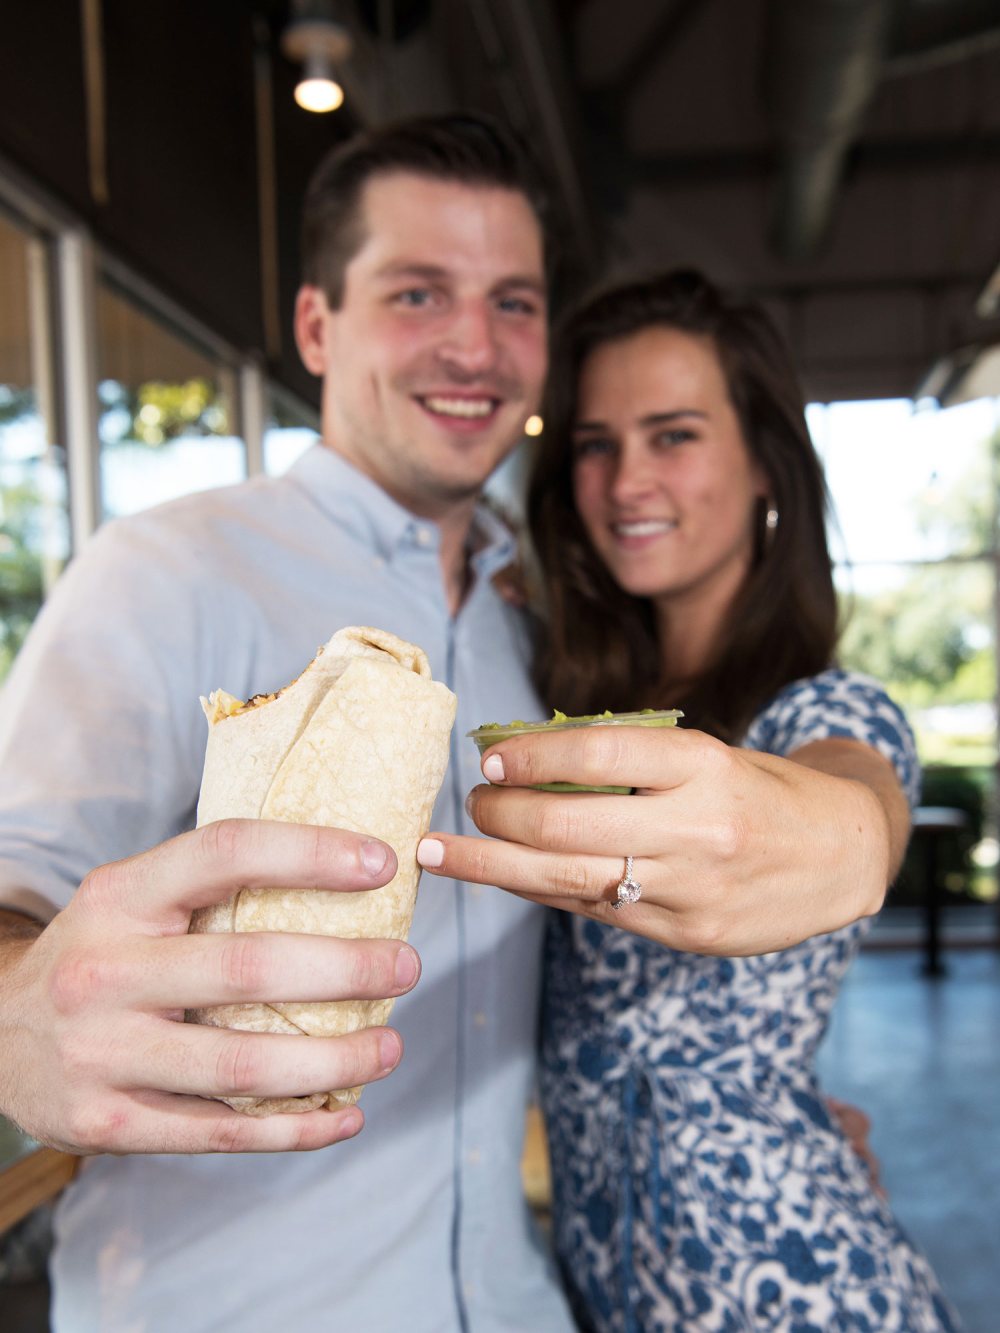 High School Sweethearts get engaged at Chipotle